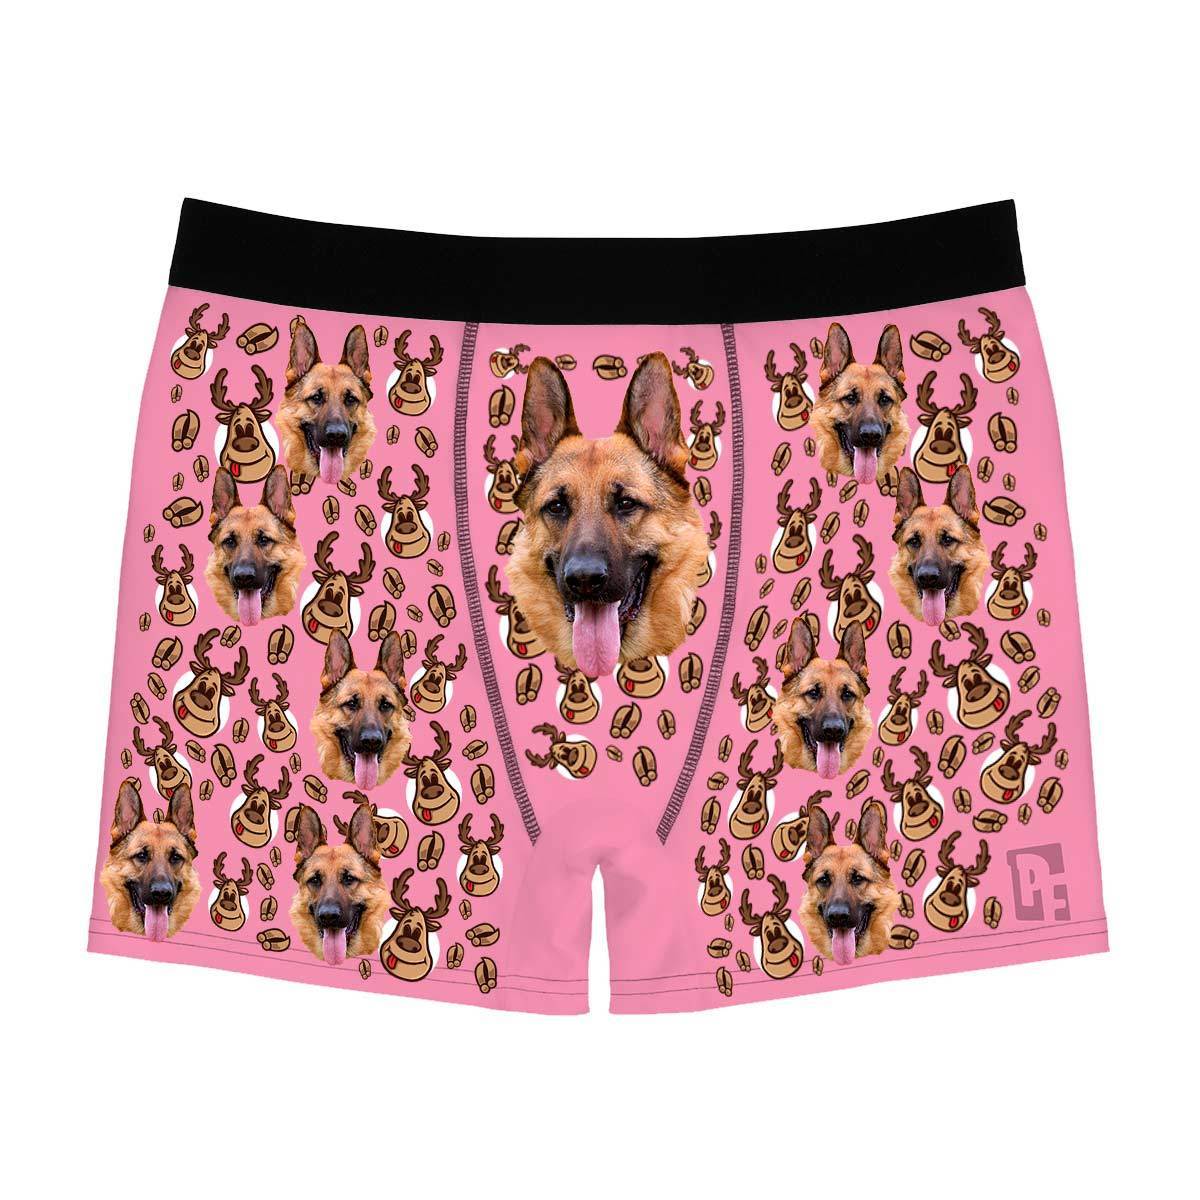 Pink Deer Hunter men's boxer briefs personalized with photo printed on them